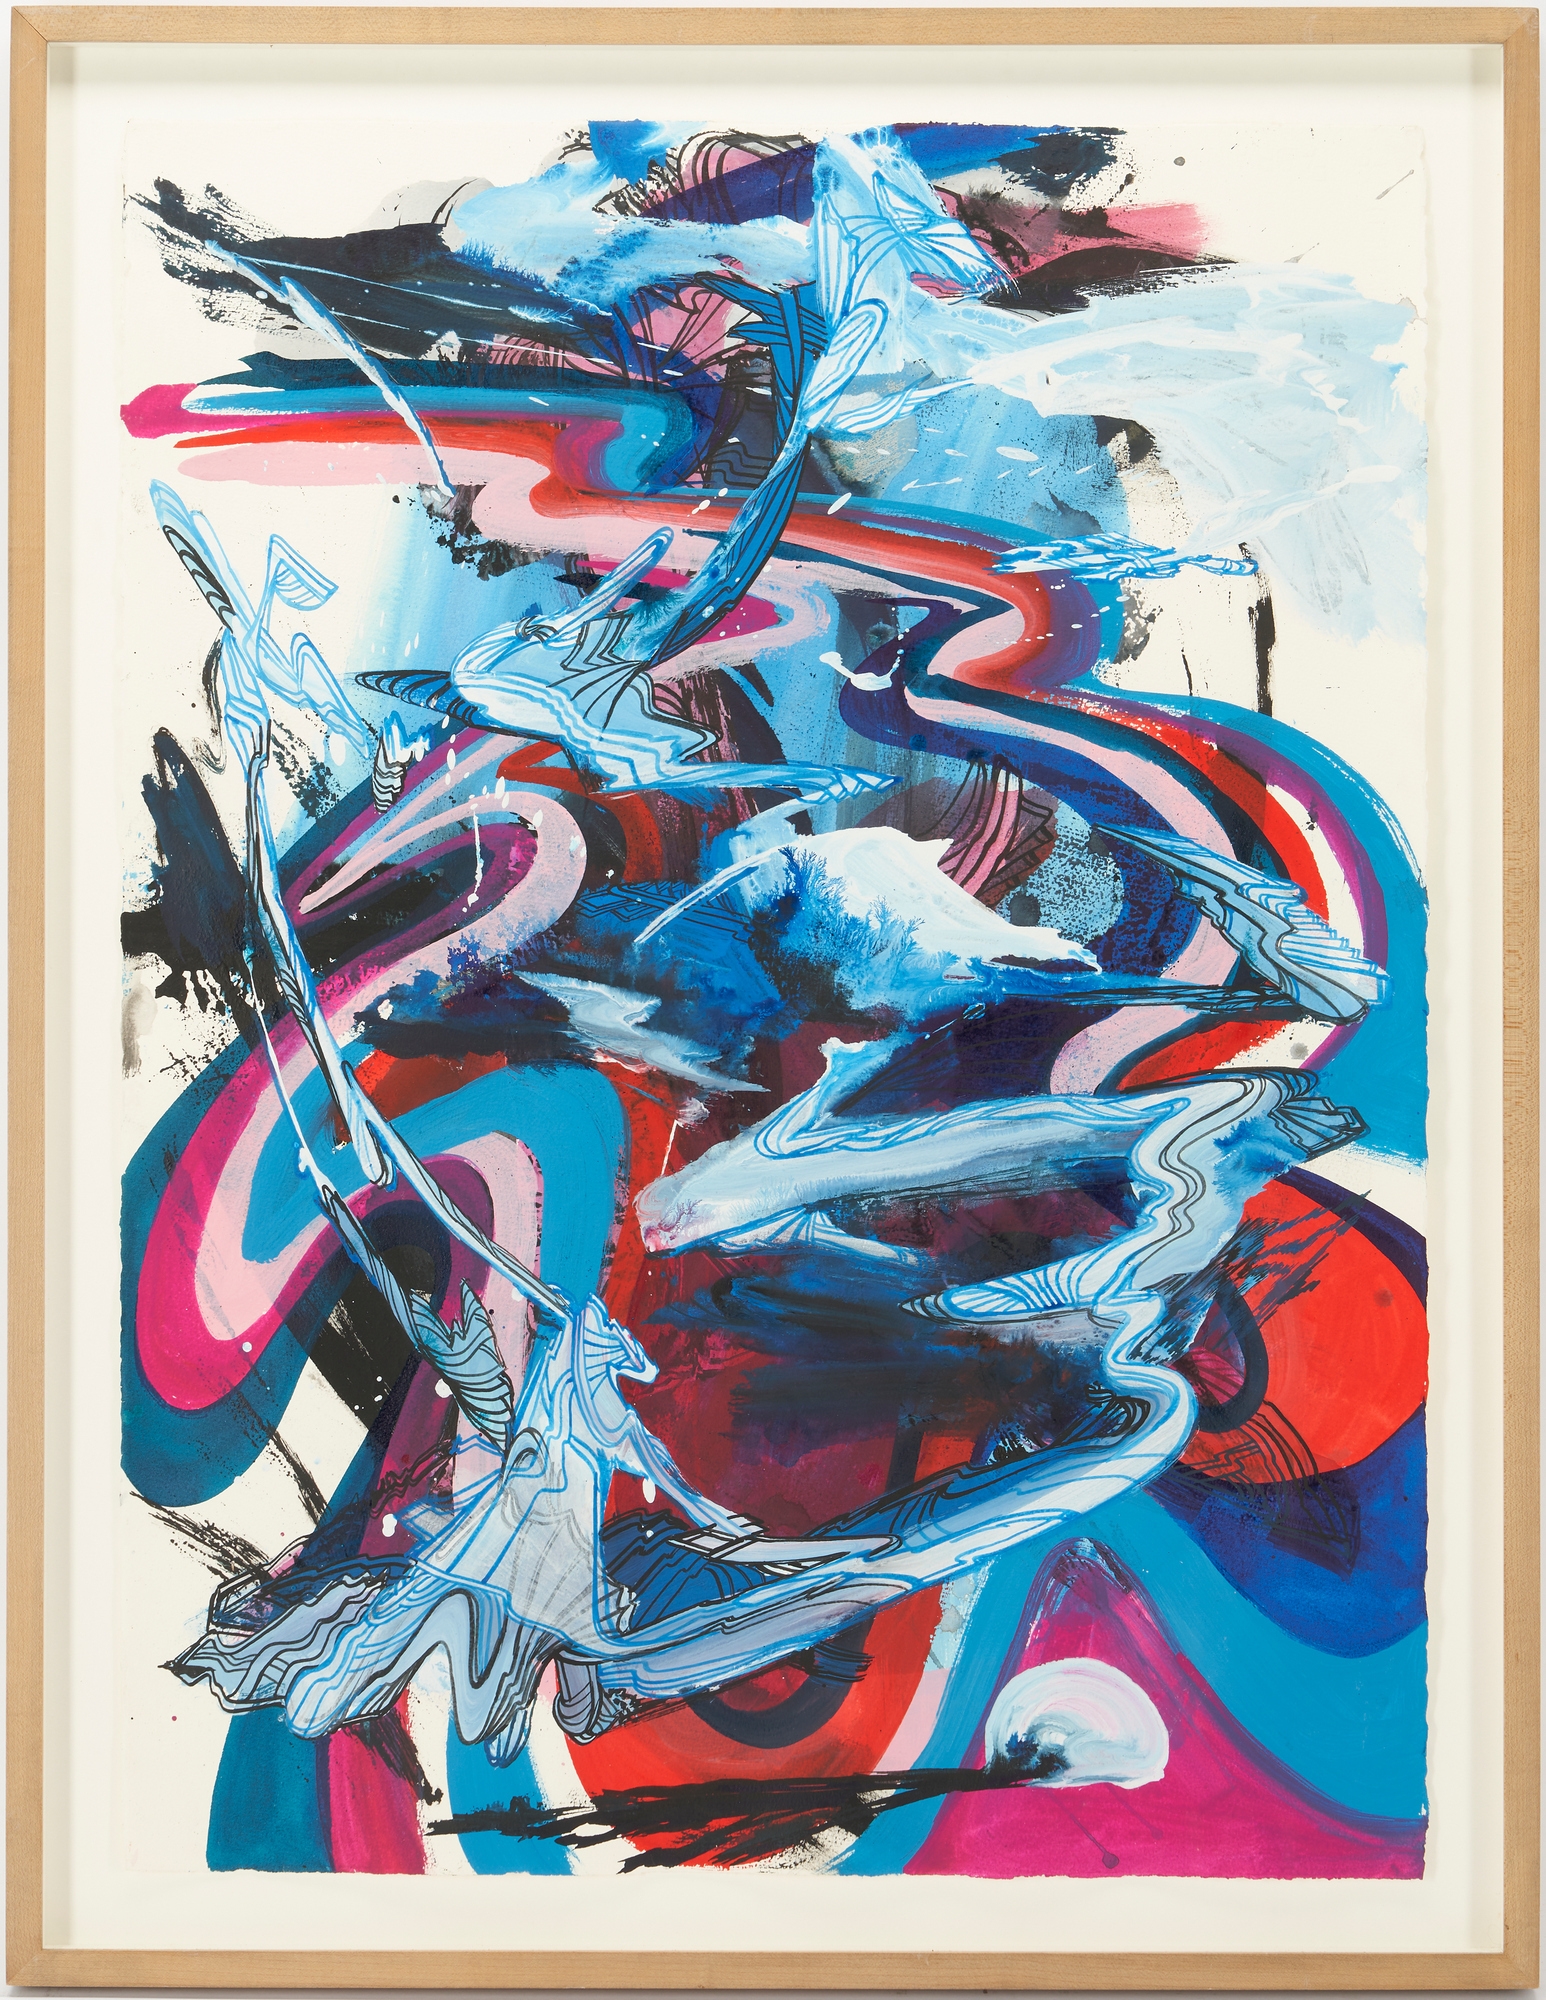 Artwork by Suling Wang, Wang Suling Mixed Media Abstract Painting, Untitled, 2006, 1 of 3, Made of acrylic and ink on paper